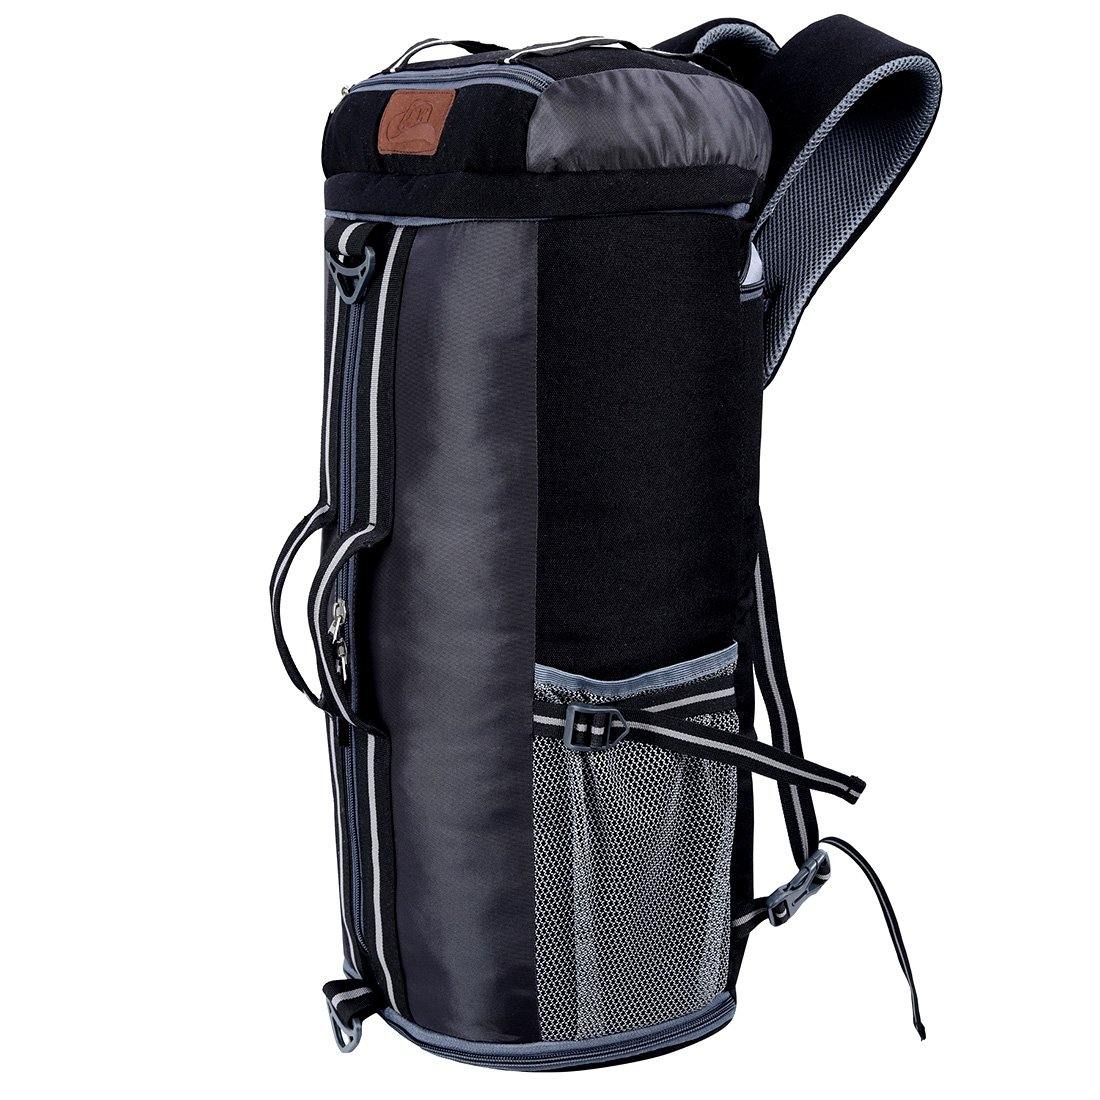 Black & Grey Casual Trekking Rucksack Bag With Shoe Compartment